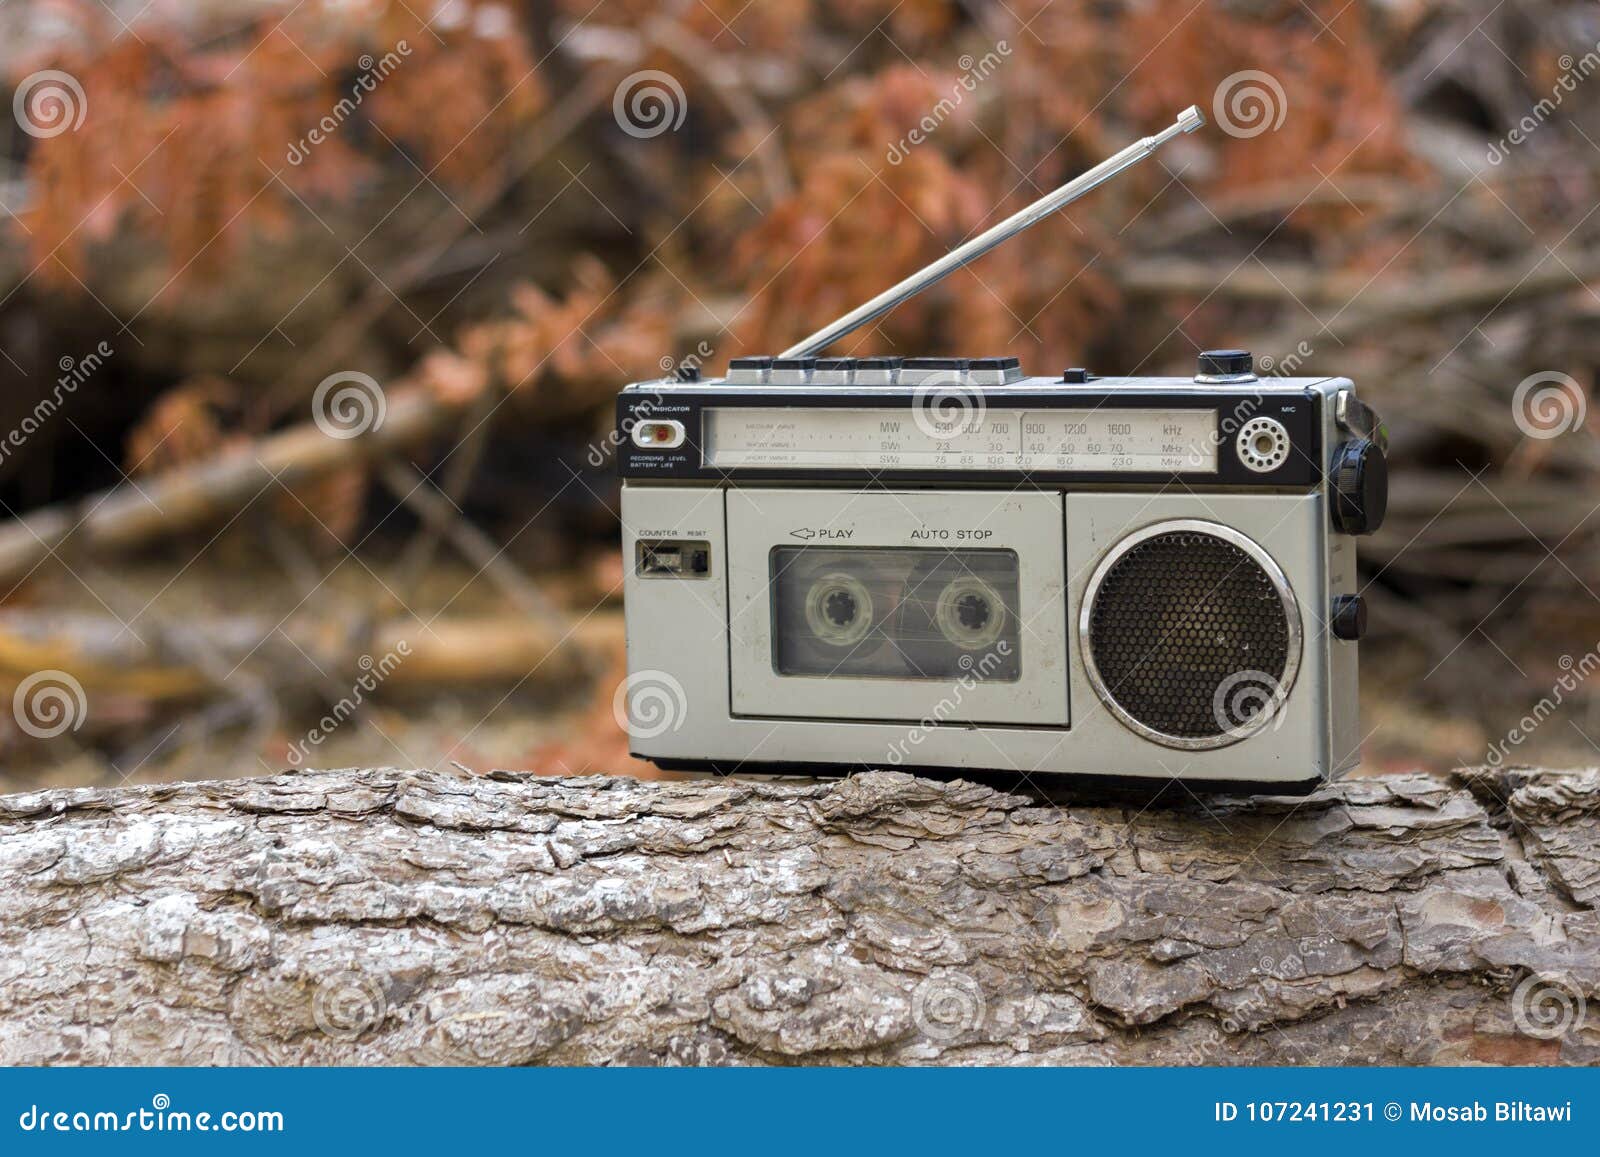 old-radio-cassette-recorder-branch-woods-old-radio-cassette-recorder-branch-woods-amman-107241231.jpg